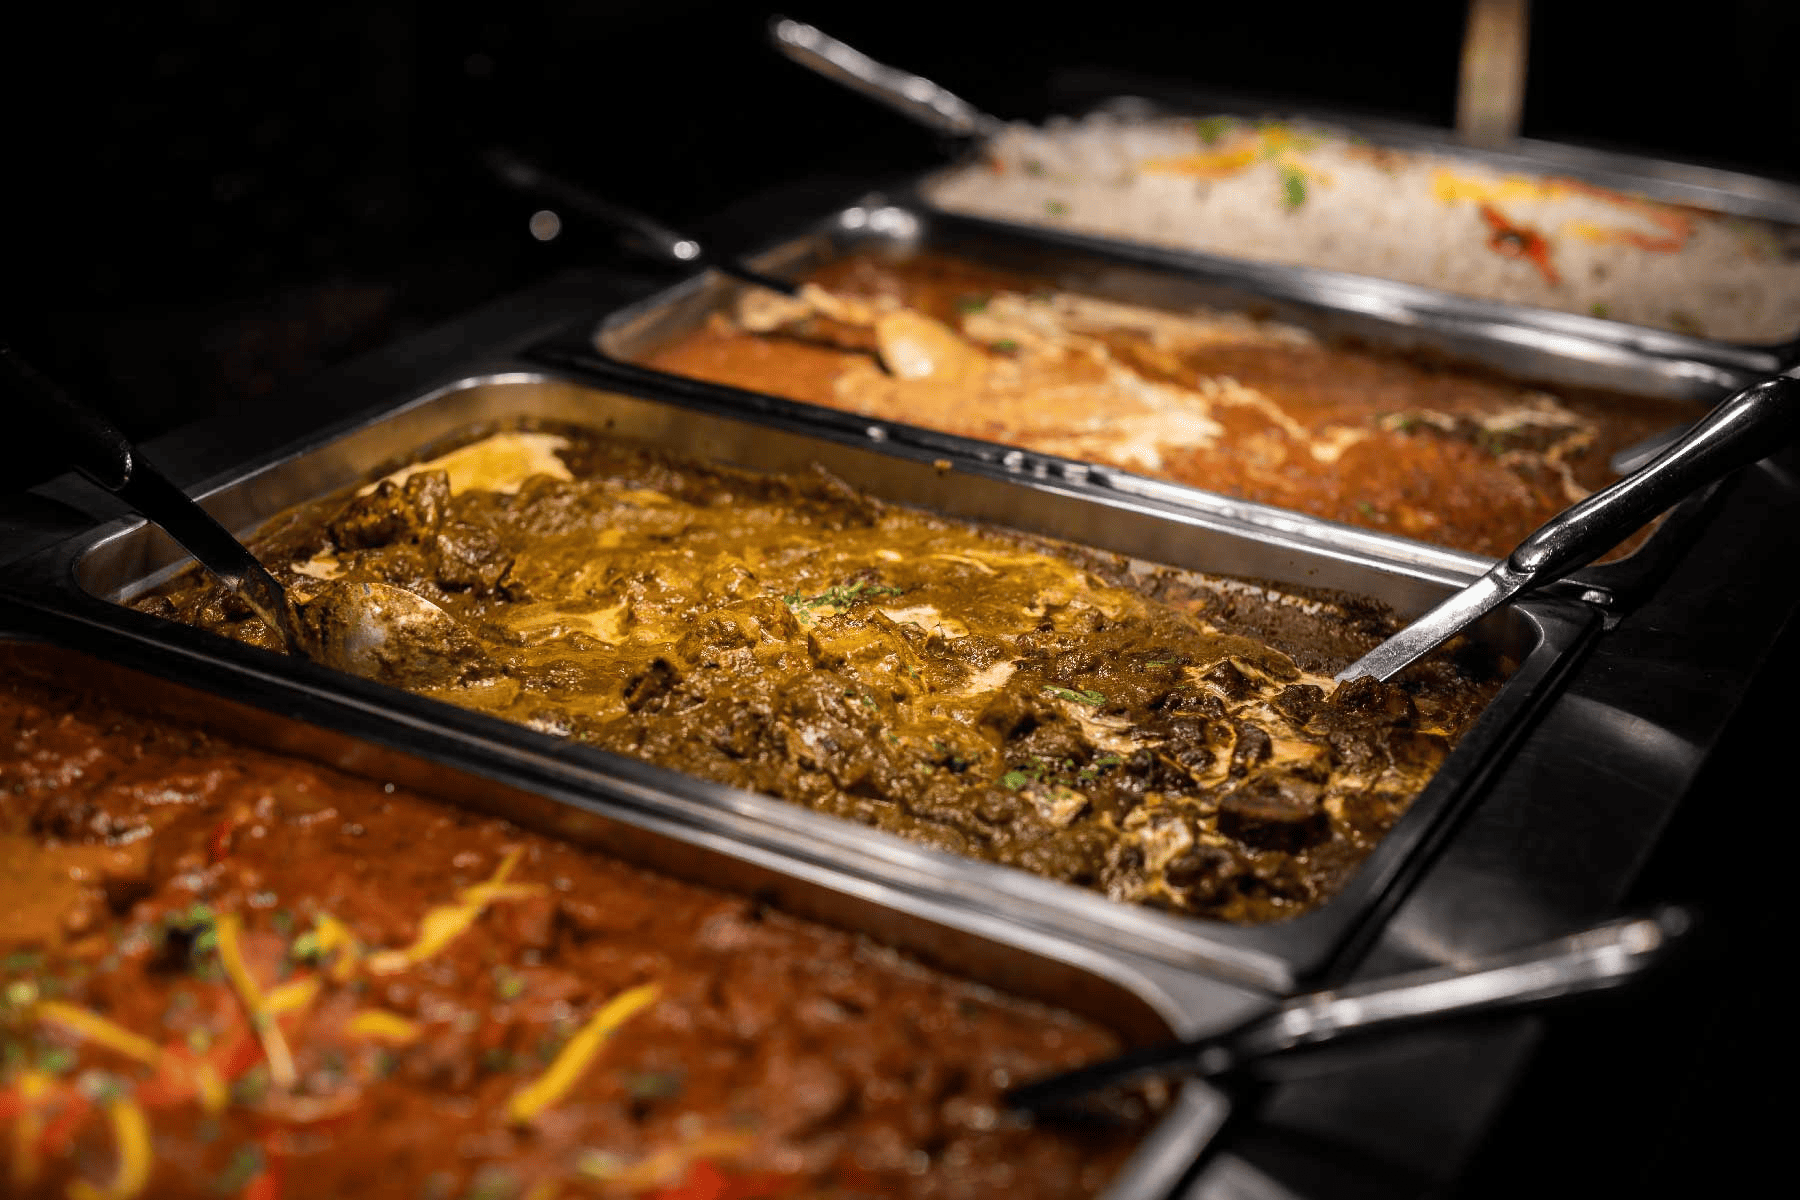 A plate of Indian food with rice, curry and naan bread served in a catering tray